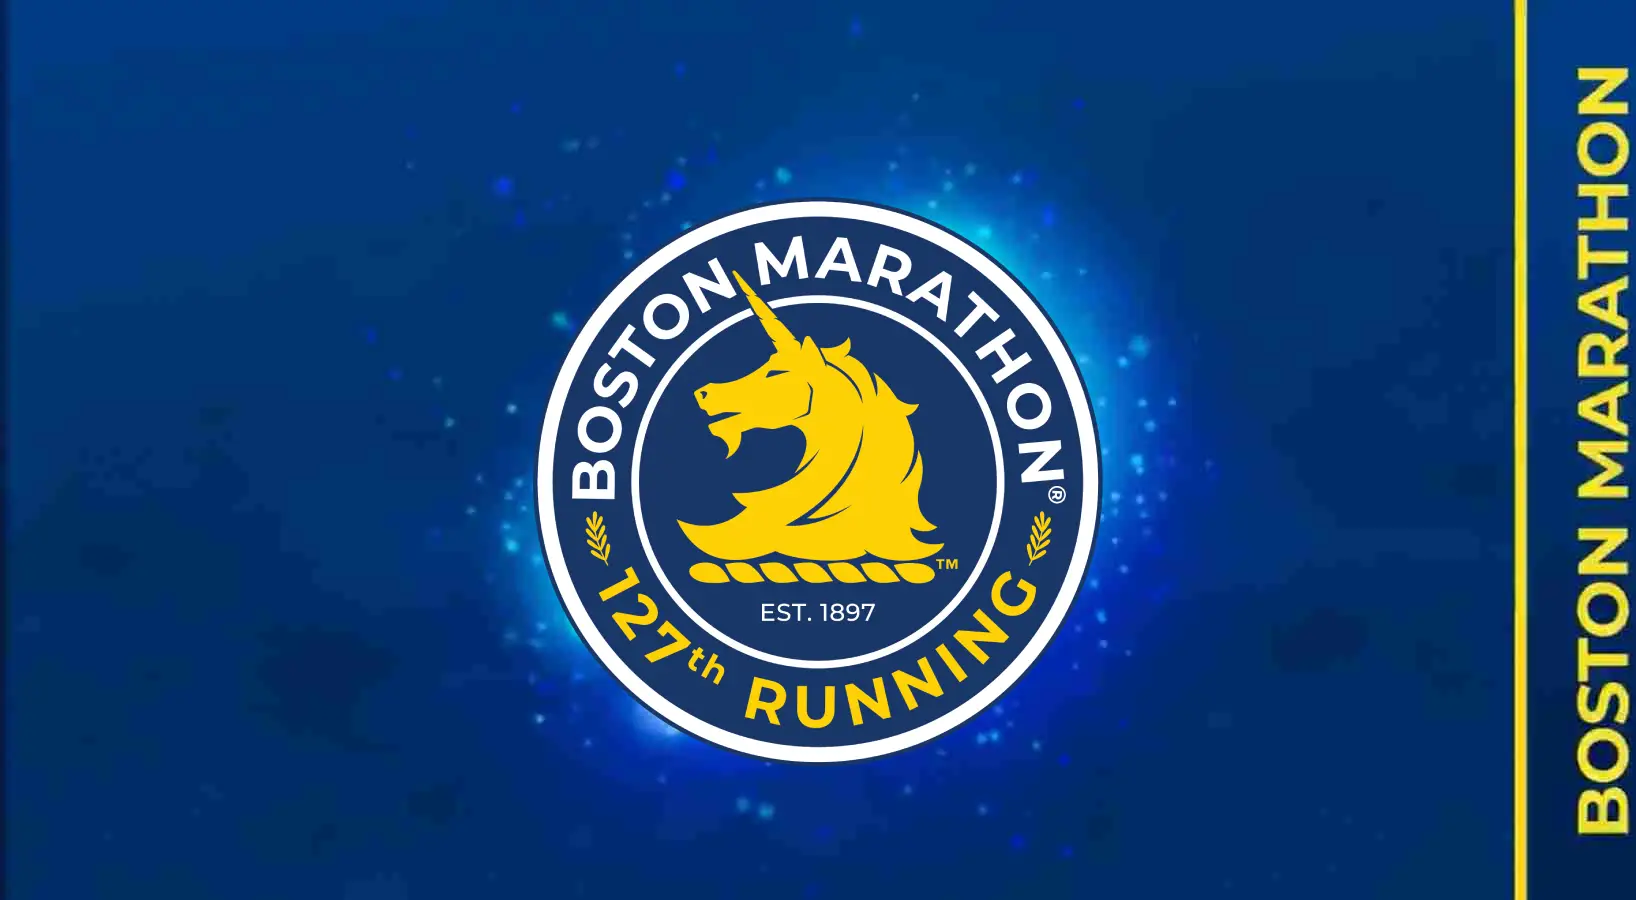 When is the 2023 Boston Marathon and how to watch it?